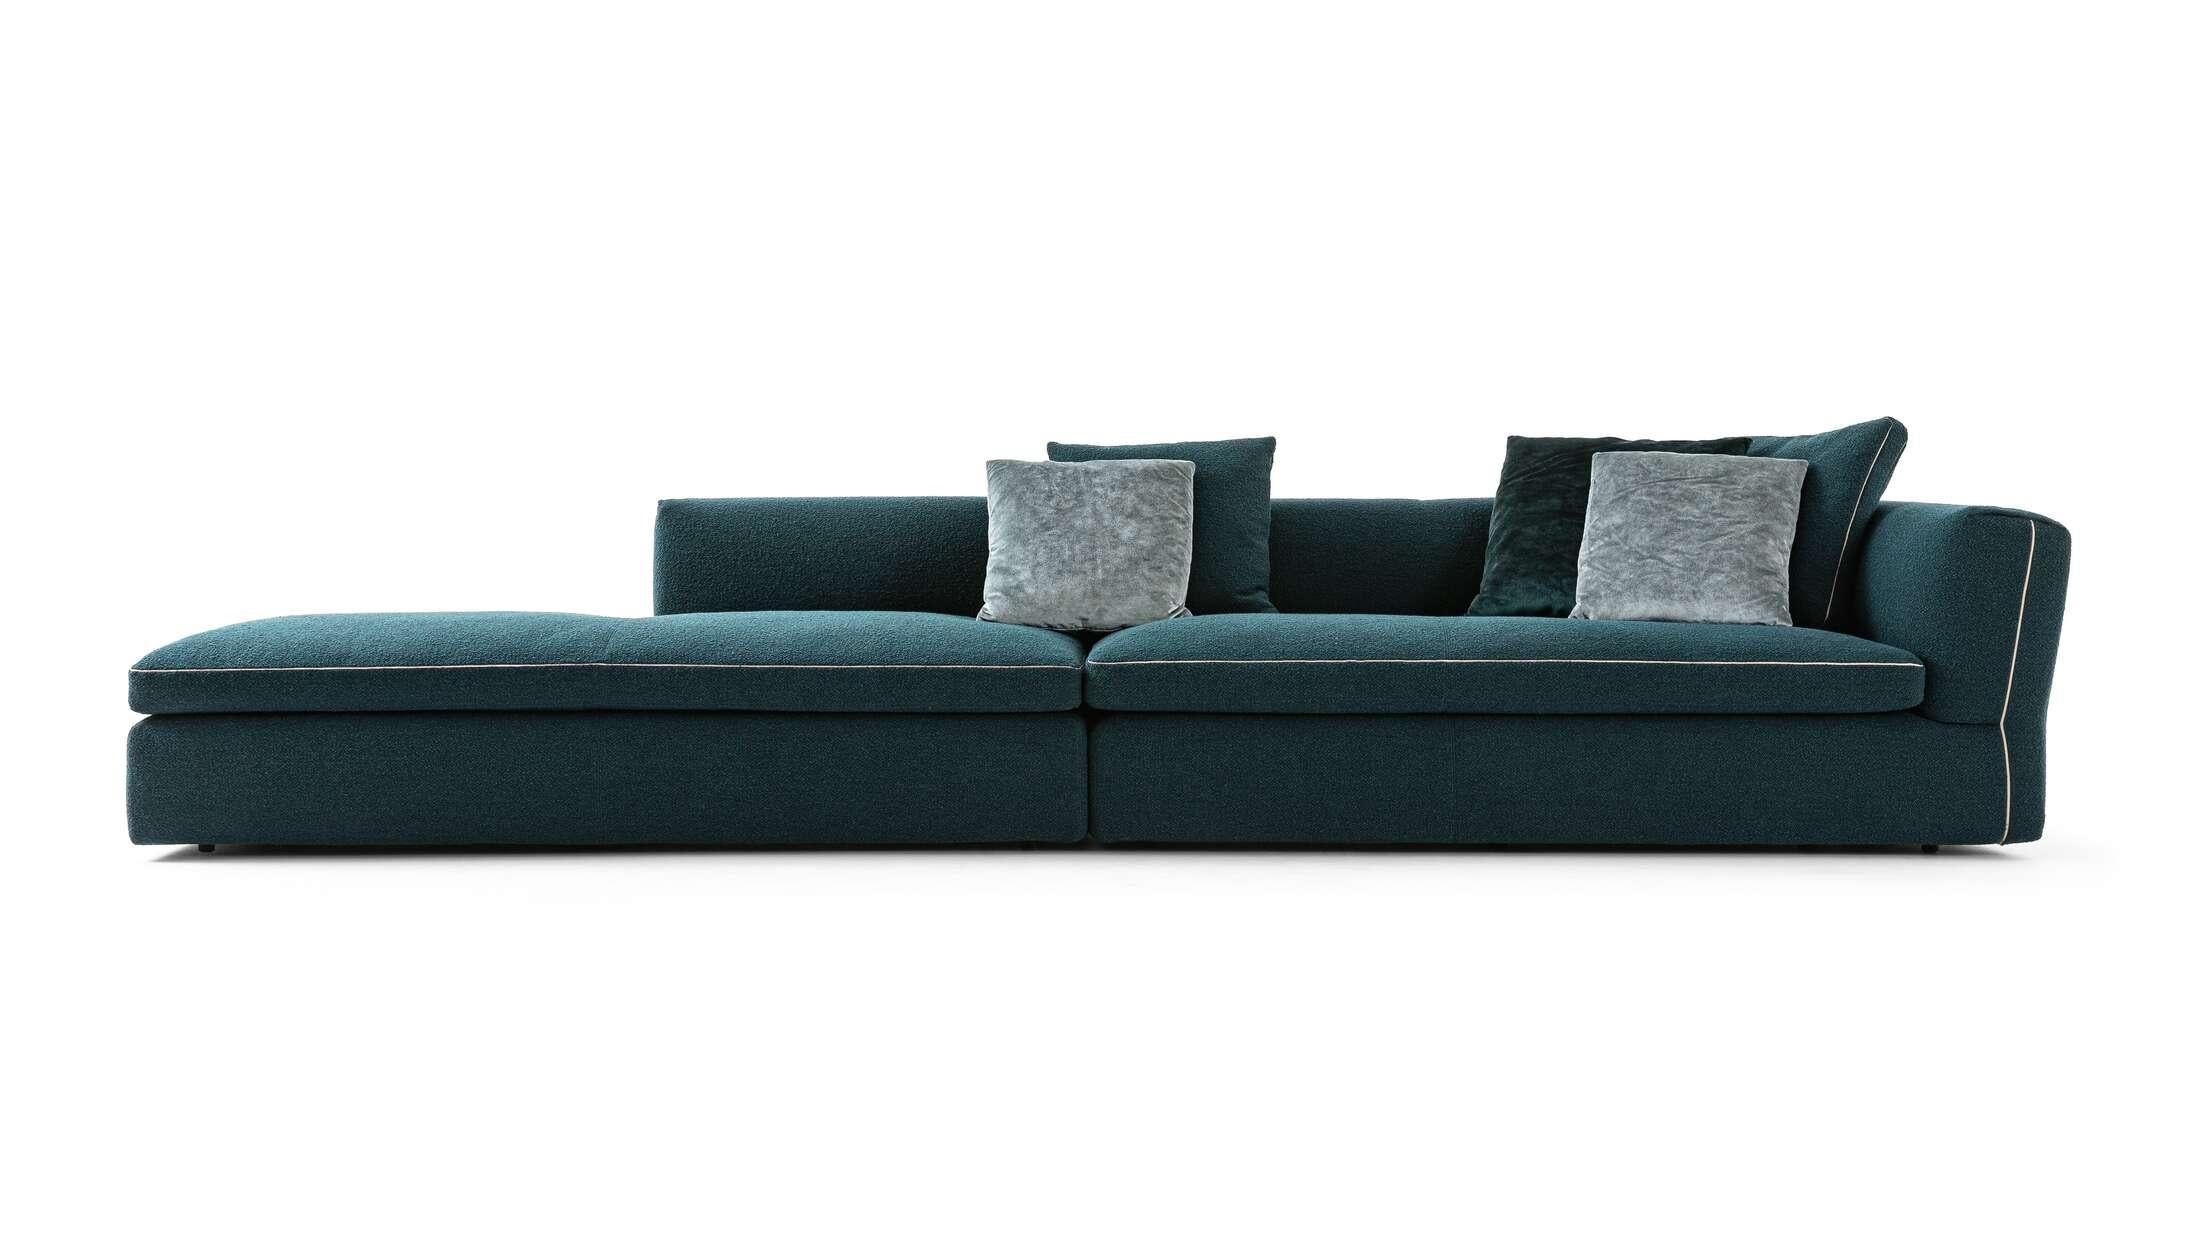 The price given applies to the sofa as shown in the first picture. Please ask for pricing in different materials/colors. 

Sofa designed by Rodolfo Dordini in 2019. Manufactured by Cassina in Italy. A sophisticated haute couture design featuring